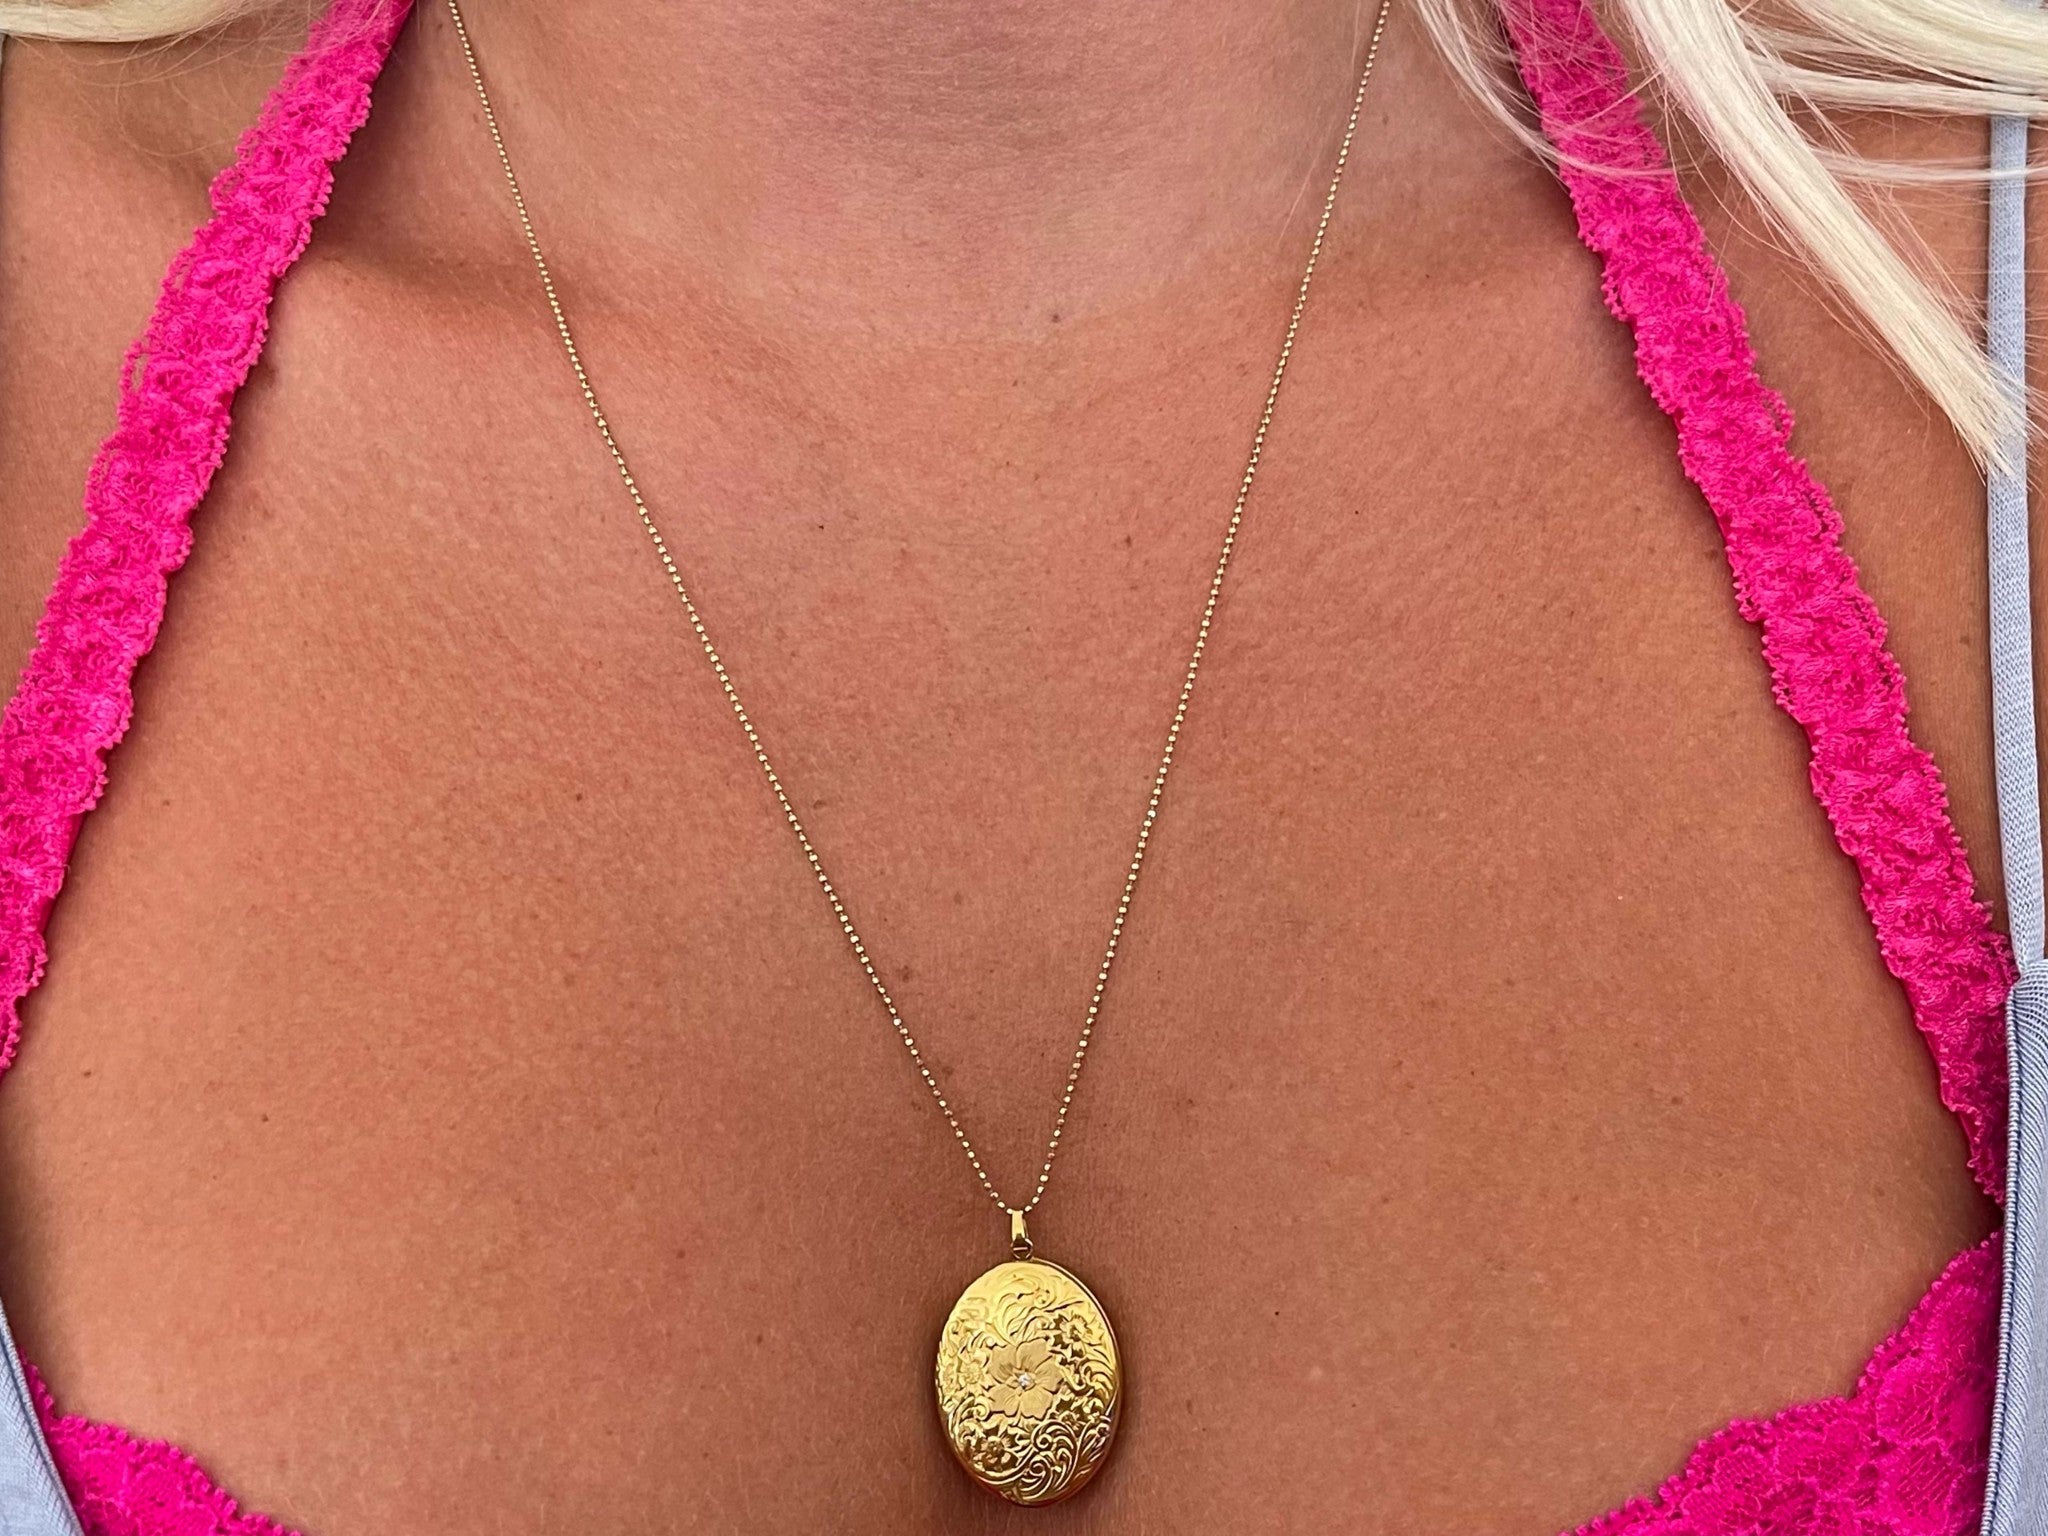 Engraved Diamond Plumeria Oval Locket Necklace in 14k Yellow Gold